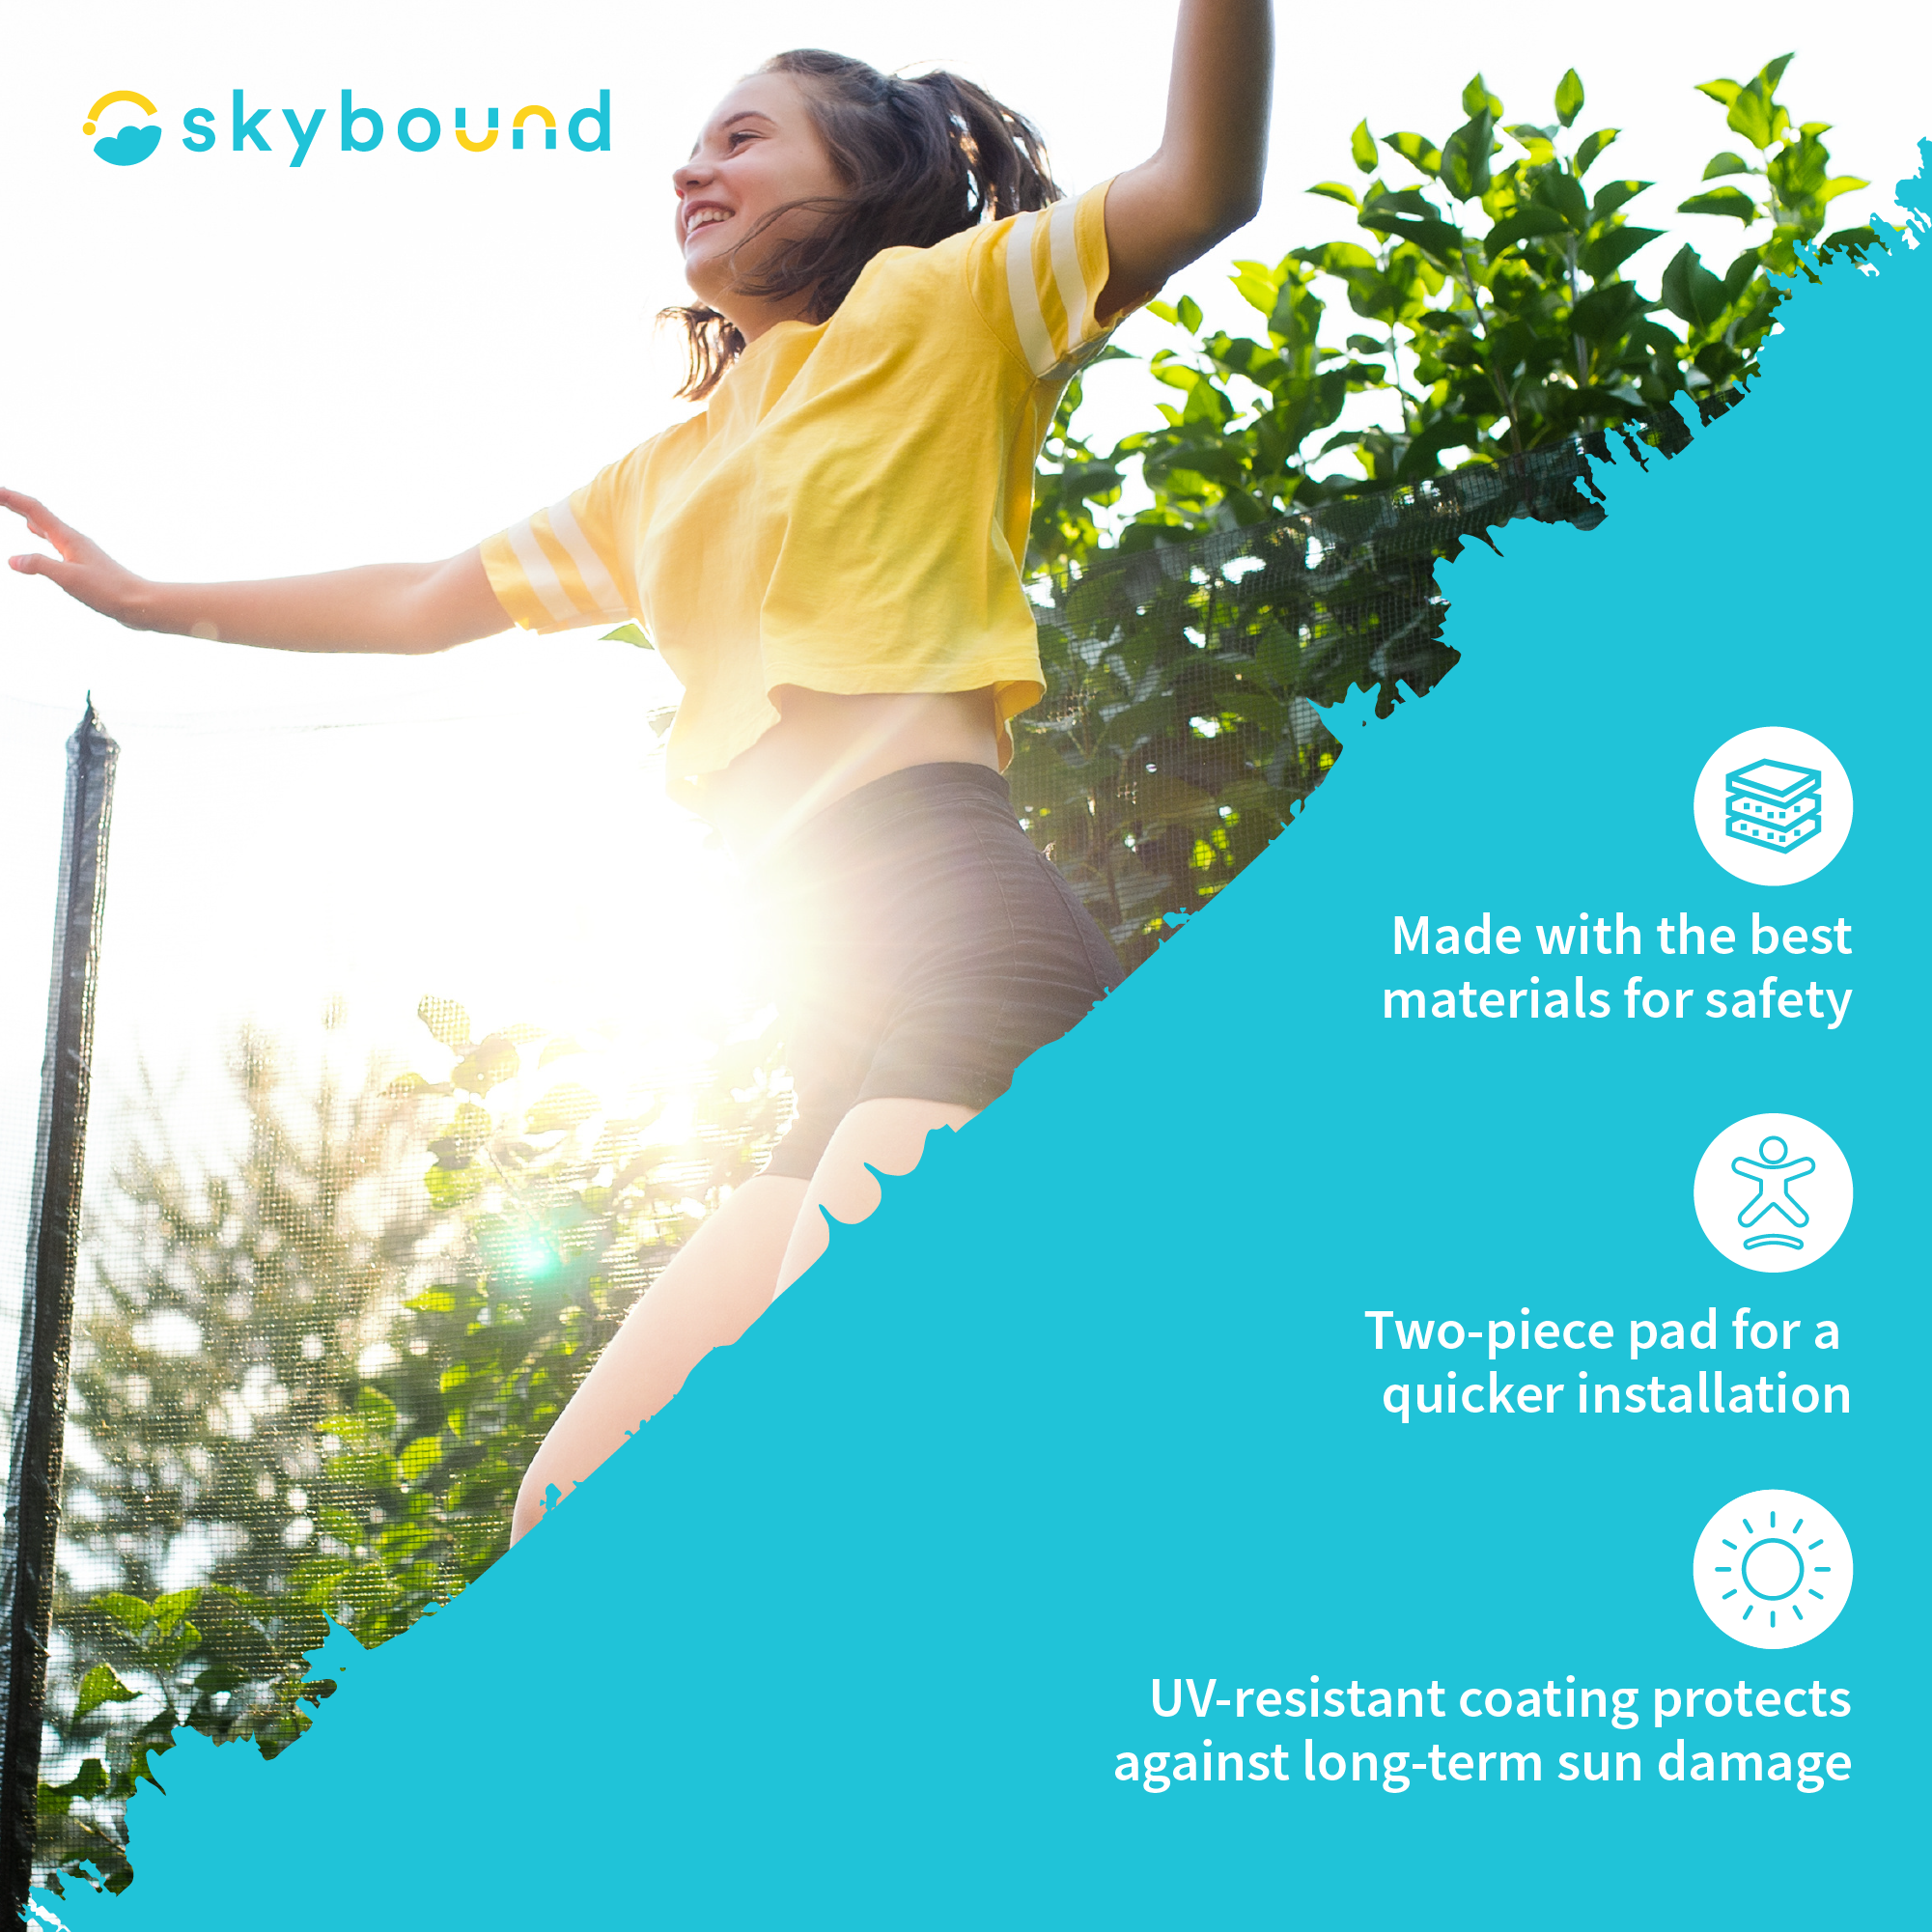 SkyBound: Materials are made with the best materials for safety.  Two-Piece pad for a quicker installation.  UV-resistant coating protects against long-term sun damage.  